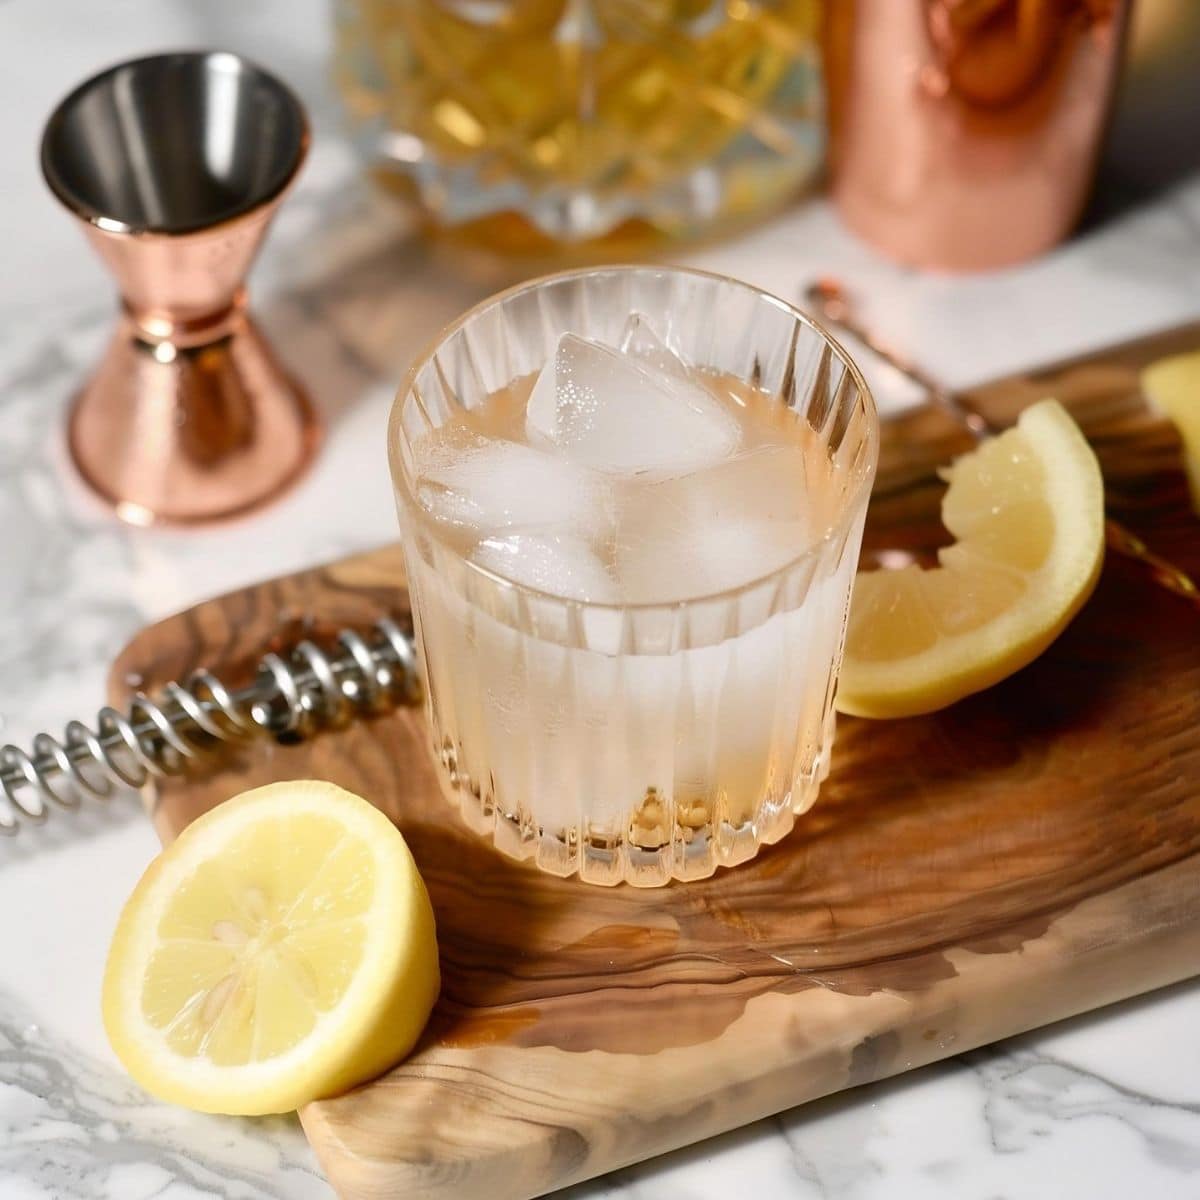 White Negroni in a Rocks Glass with Ice on a Wooden Cutting Board with Cut Lemons and Rose Gold Cocktail-Making Equipment